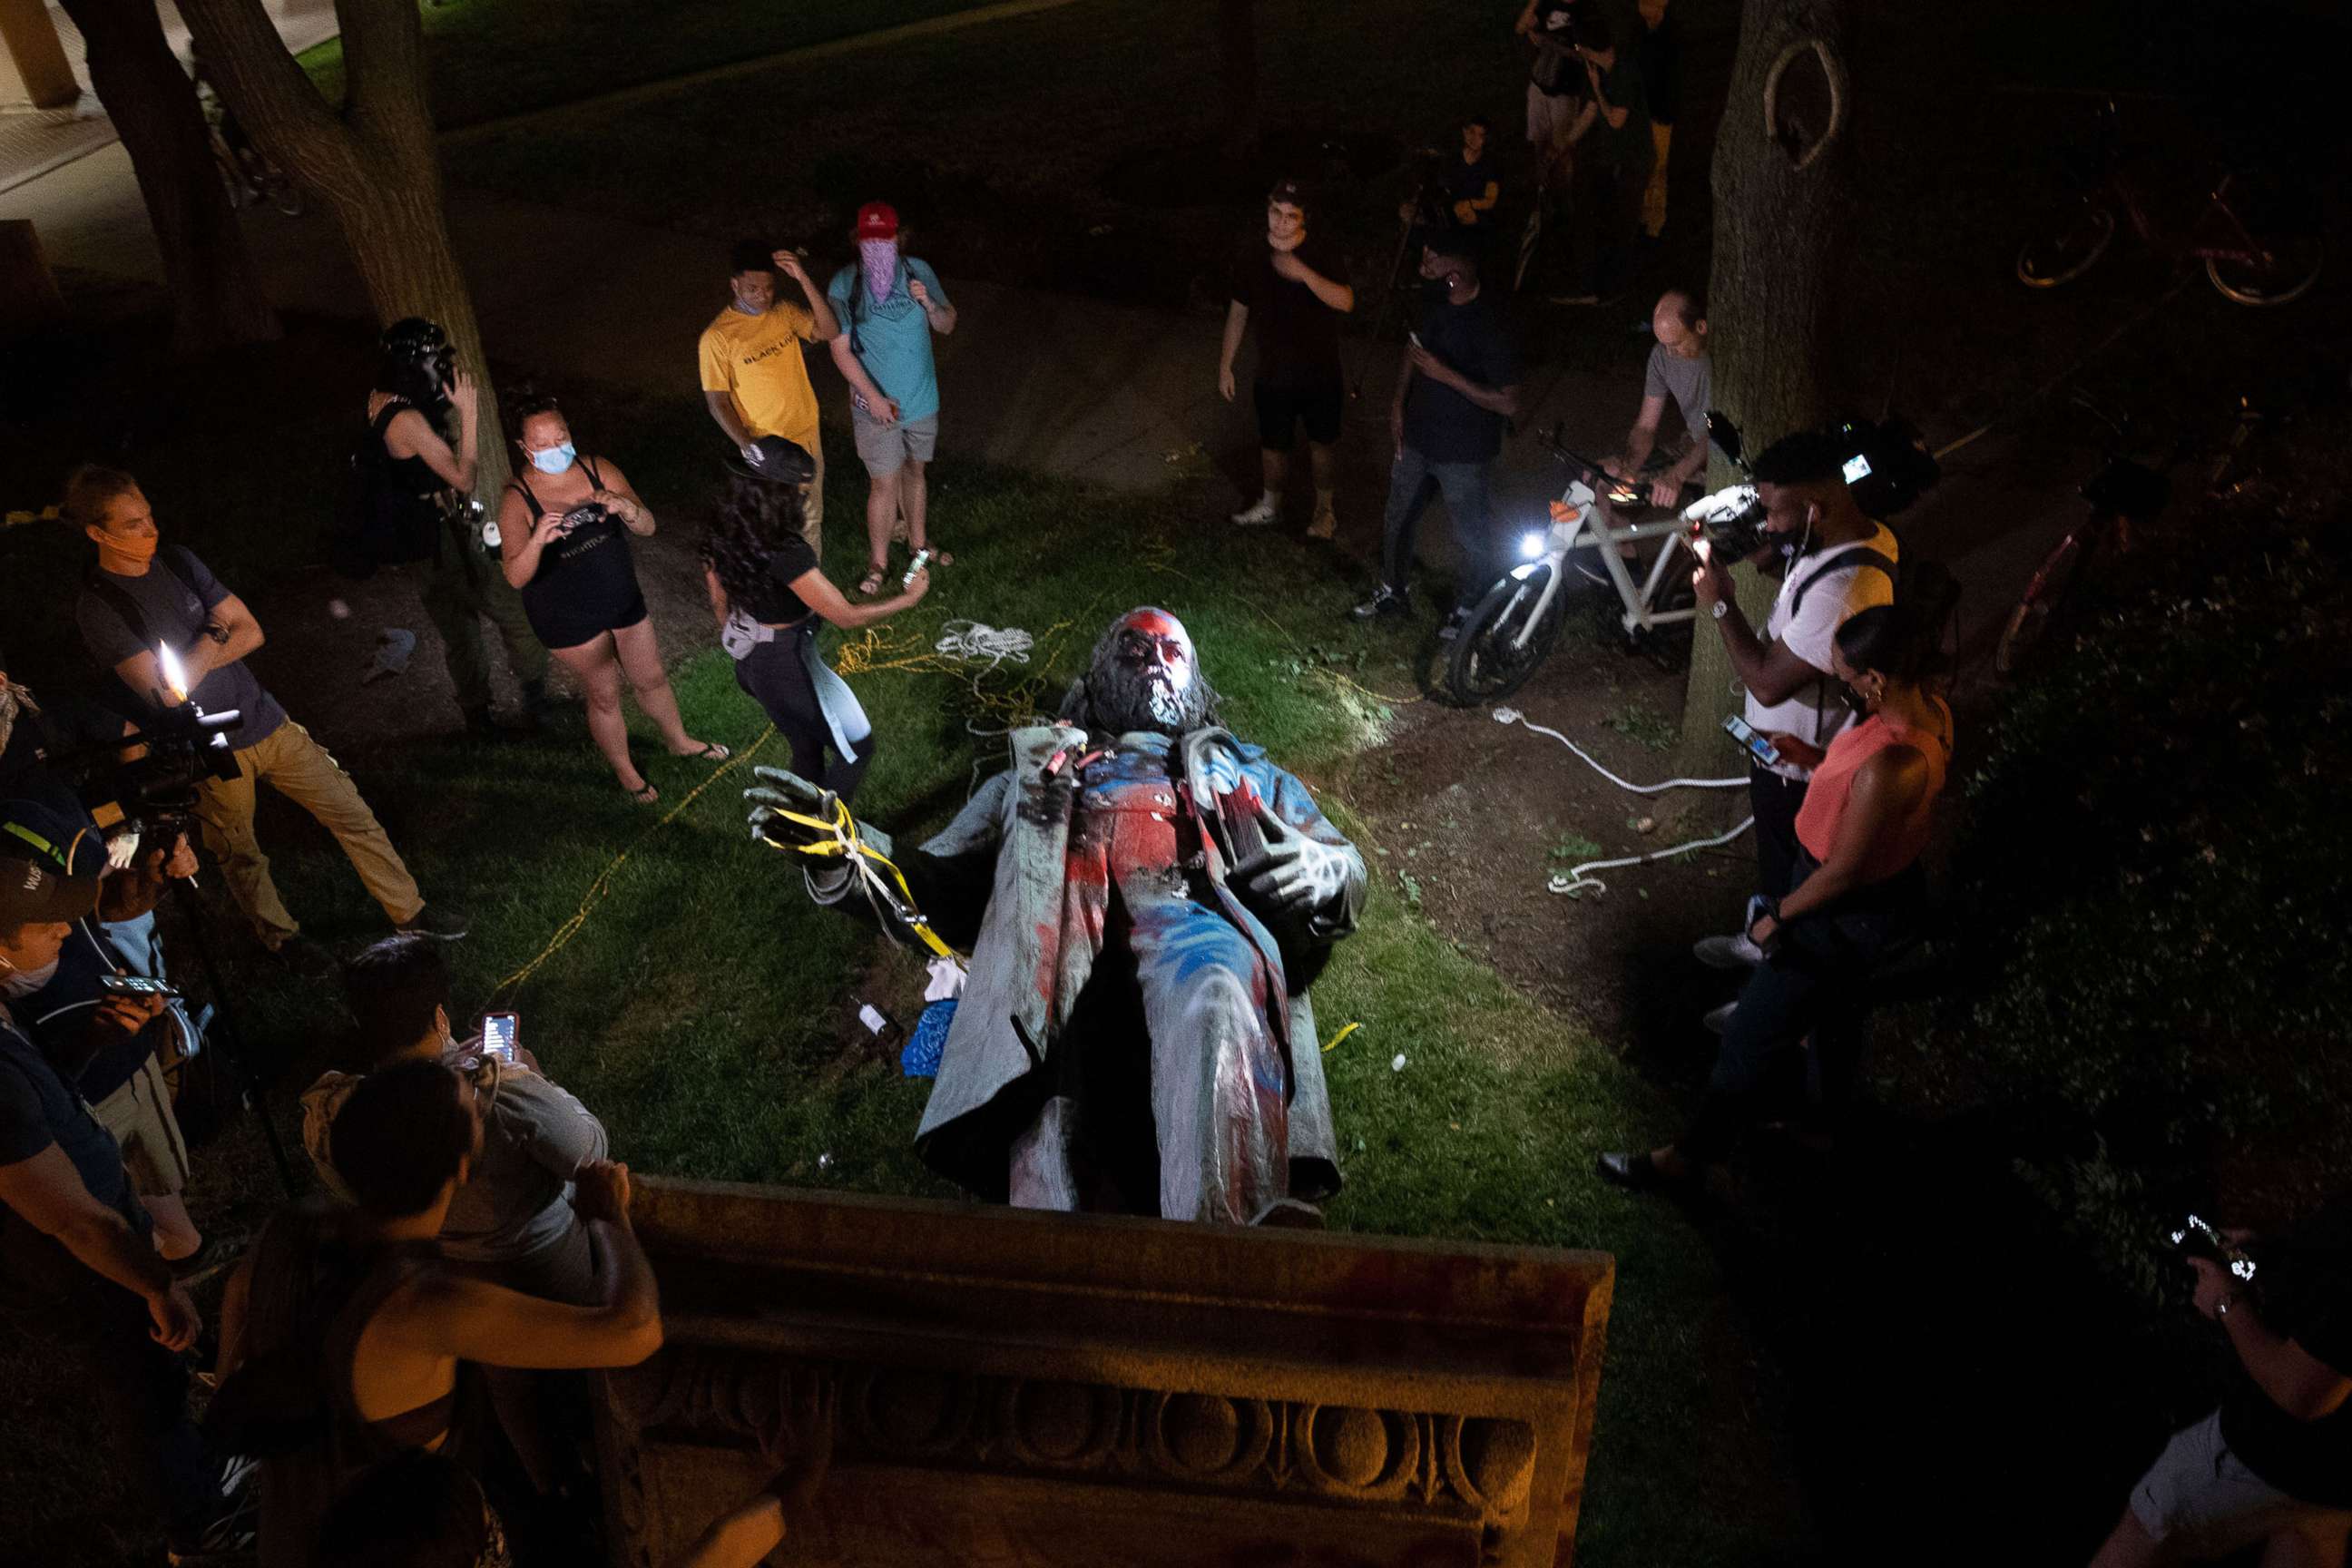 PHOTO: A statue of Confederate General Albert Pike lays on the ground after being toppled near Judiciary Square following a day of Juneteenth celebrations in Washington, DC, June 20, 2020.